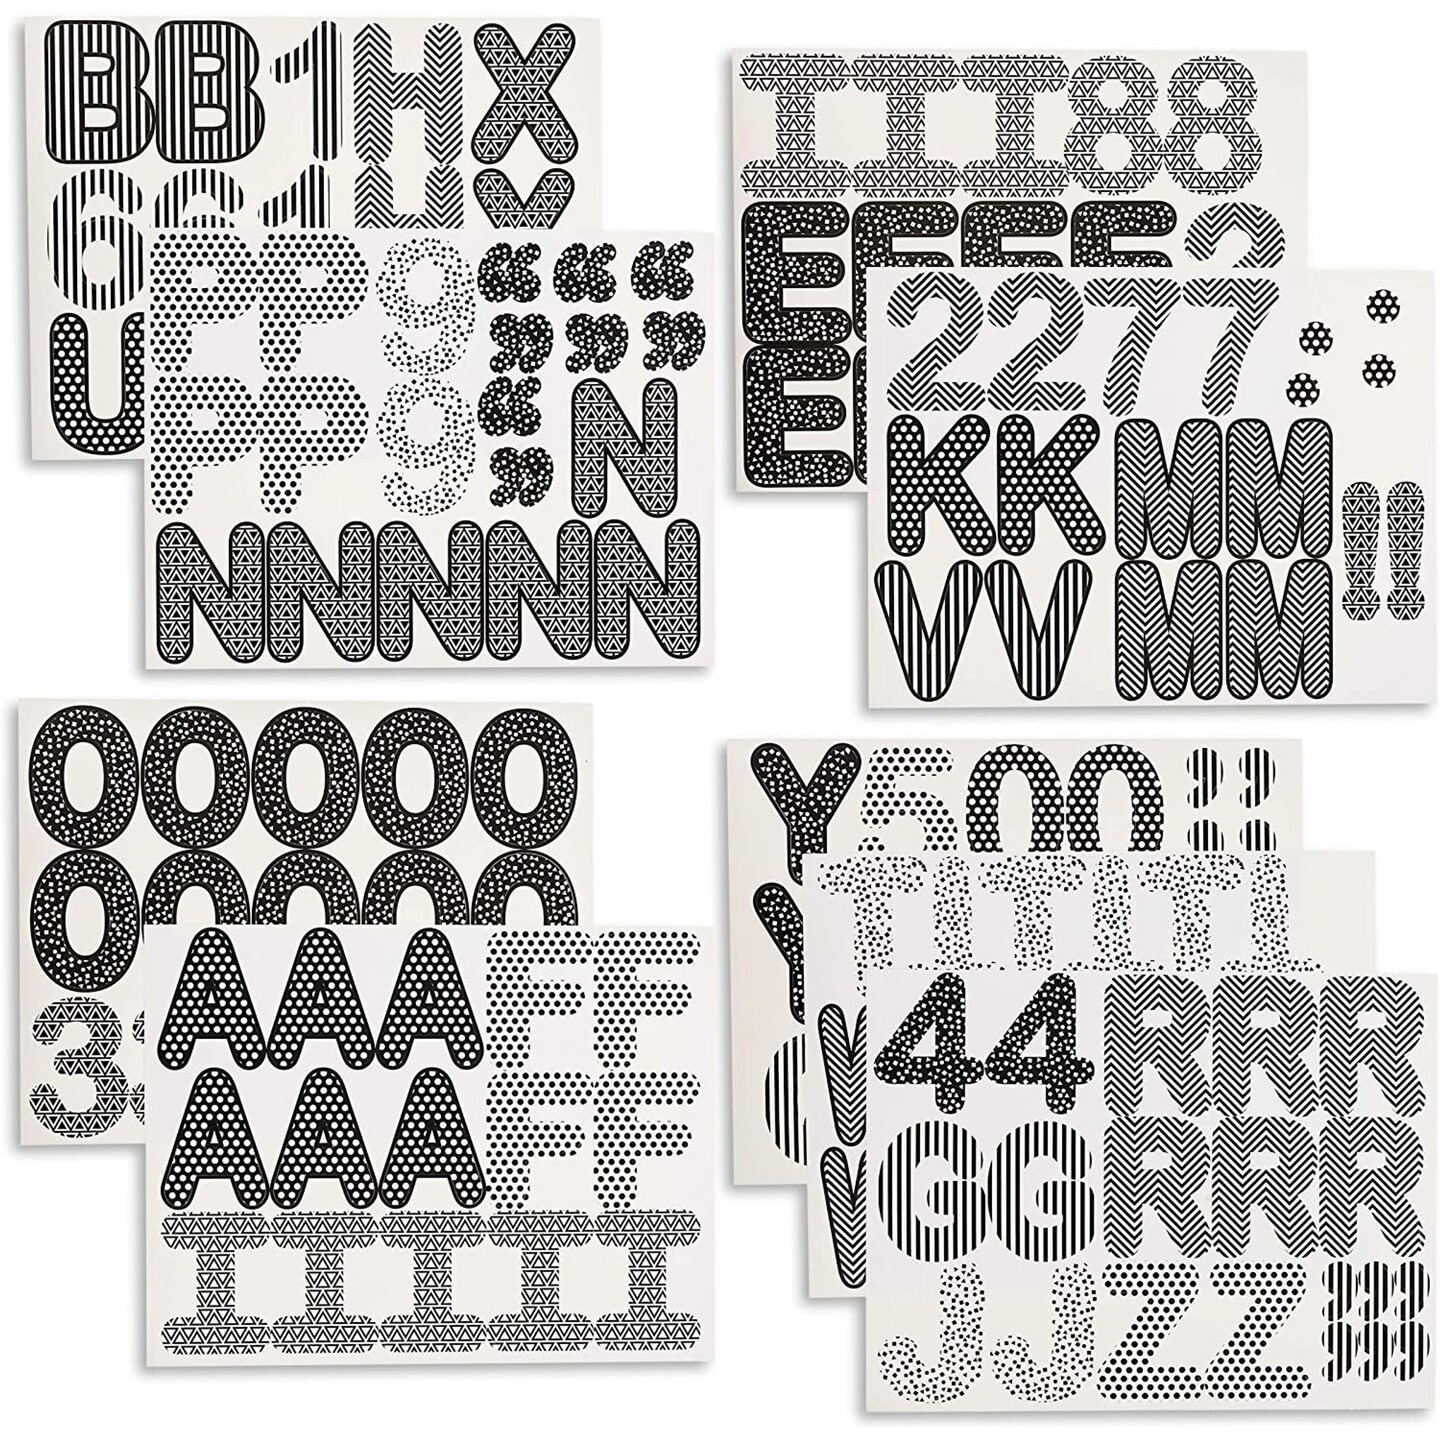 FreshCut Crafts | Bulletin Board Letters & Numbers, Bright 3 in. Capital  Alphabet Letters, Numbers, Punctuation, US Made Card Stock Punch Out  Letters